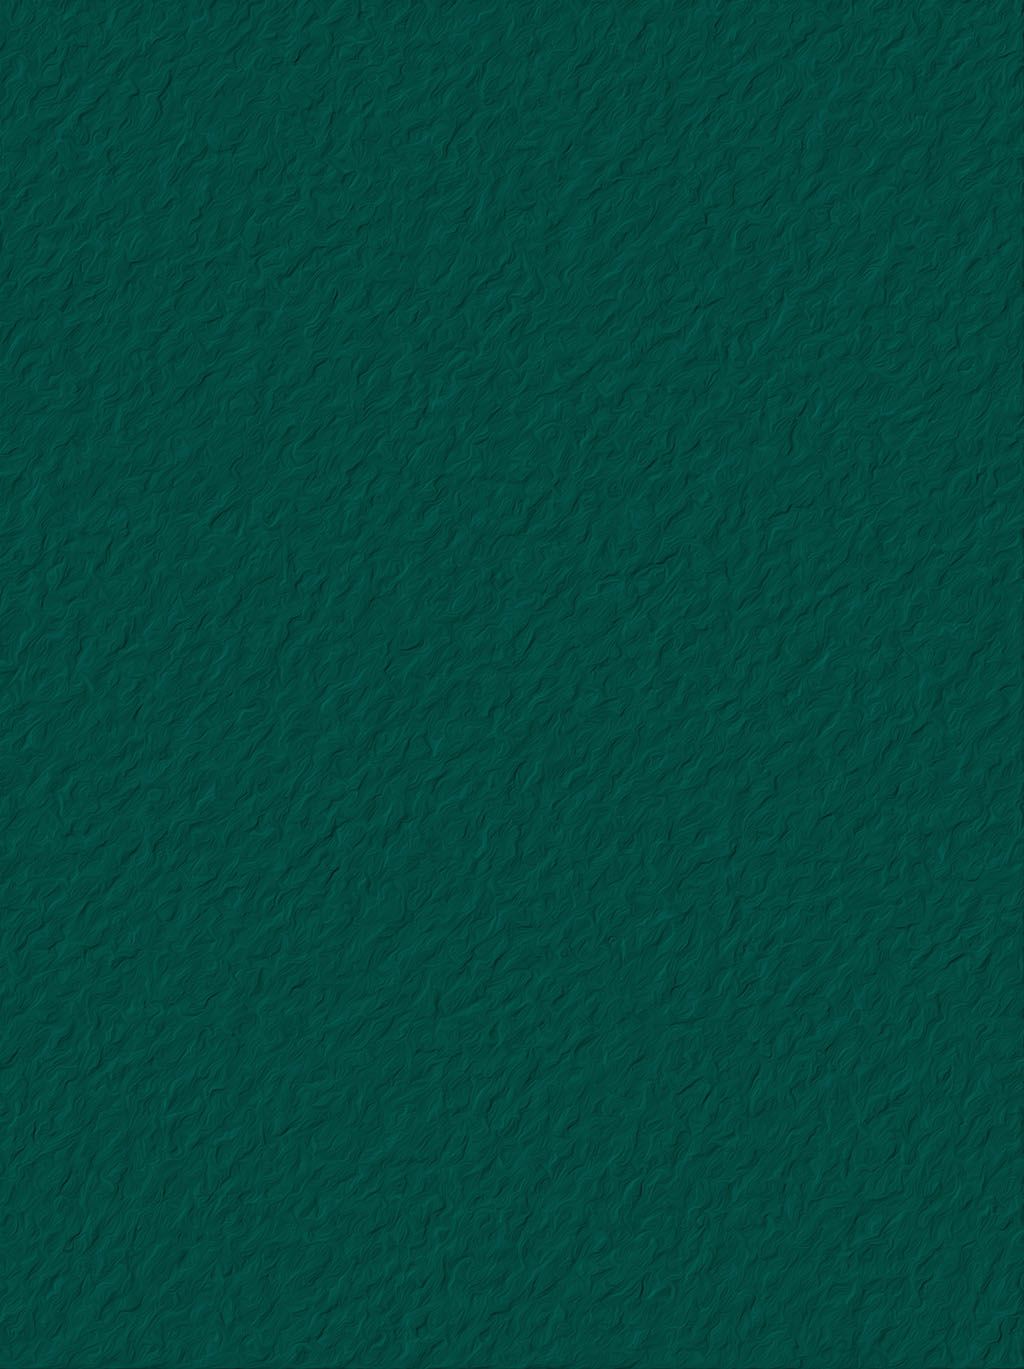 Simple Green Solid Background. Color wallpaper iphone, Solid color background, Simple green